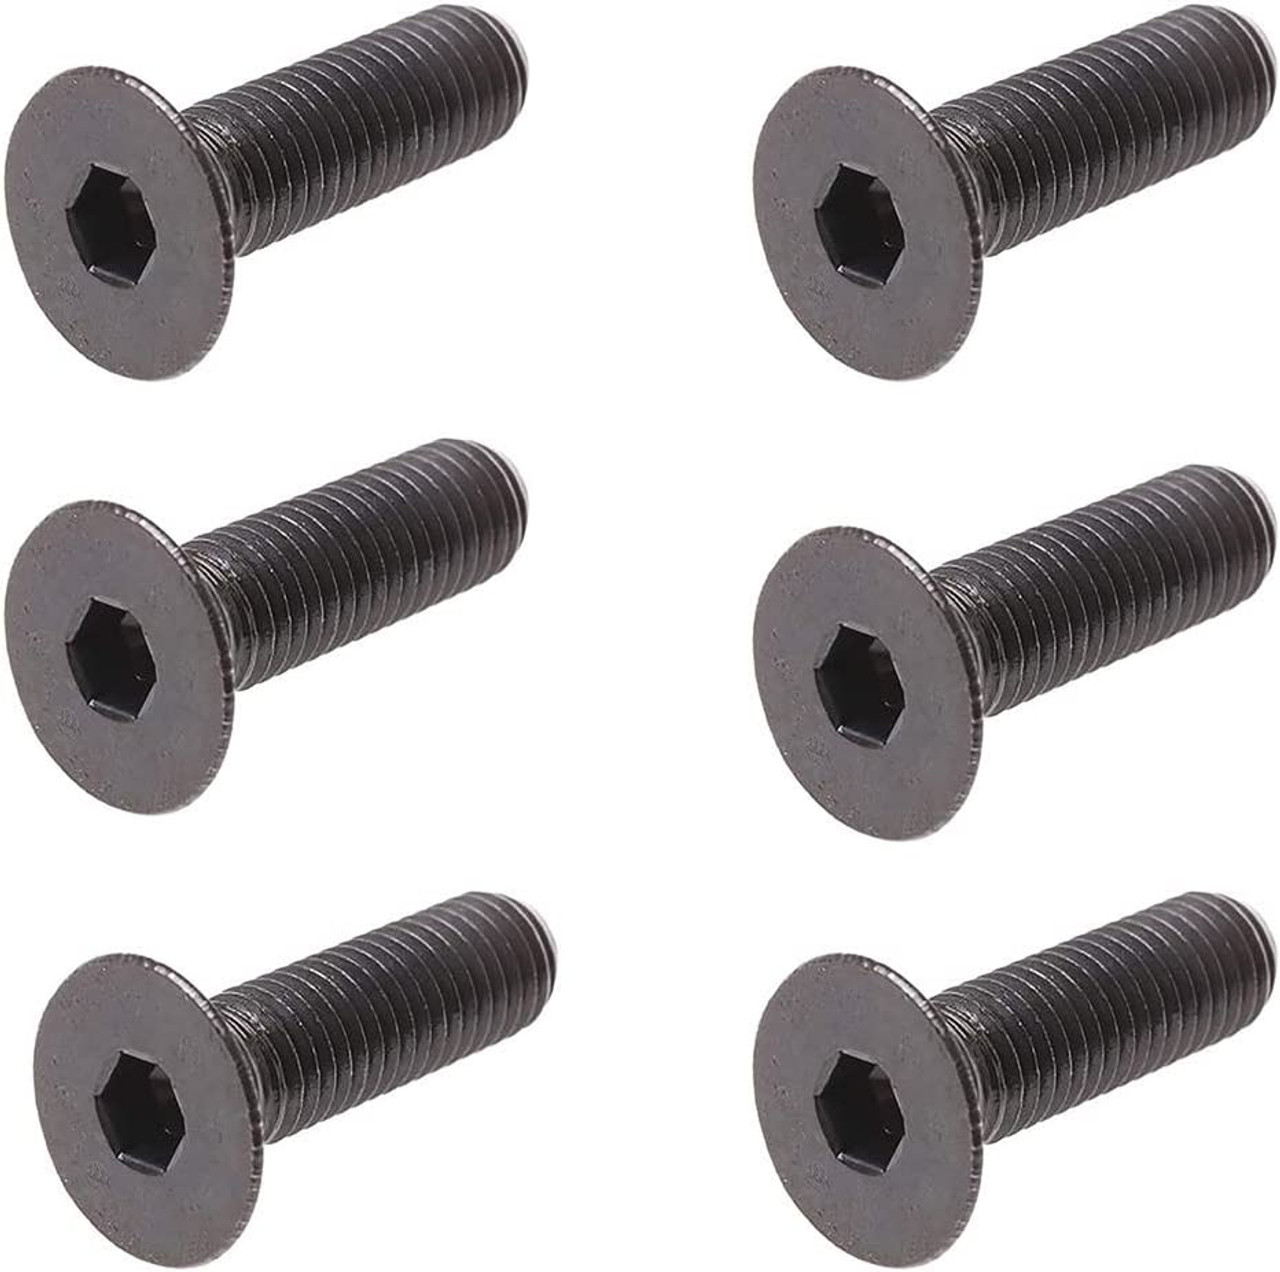 4mm High Tensile Countersunk Bolts (50 Pack) M4 x 20mm (Including Head) Black (10.9 H/T) Socket Csk Allen Key Head Bolt/Screws Free UK Delivery